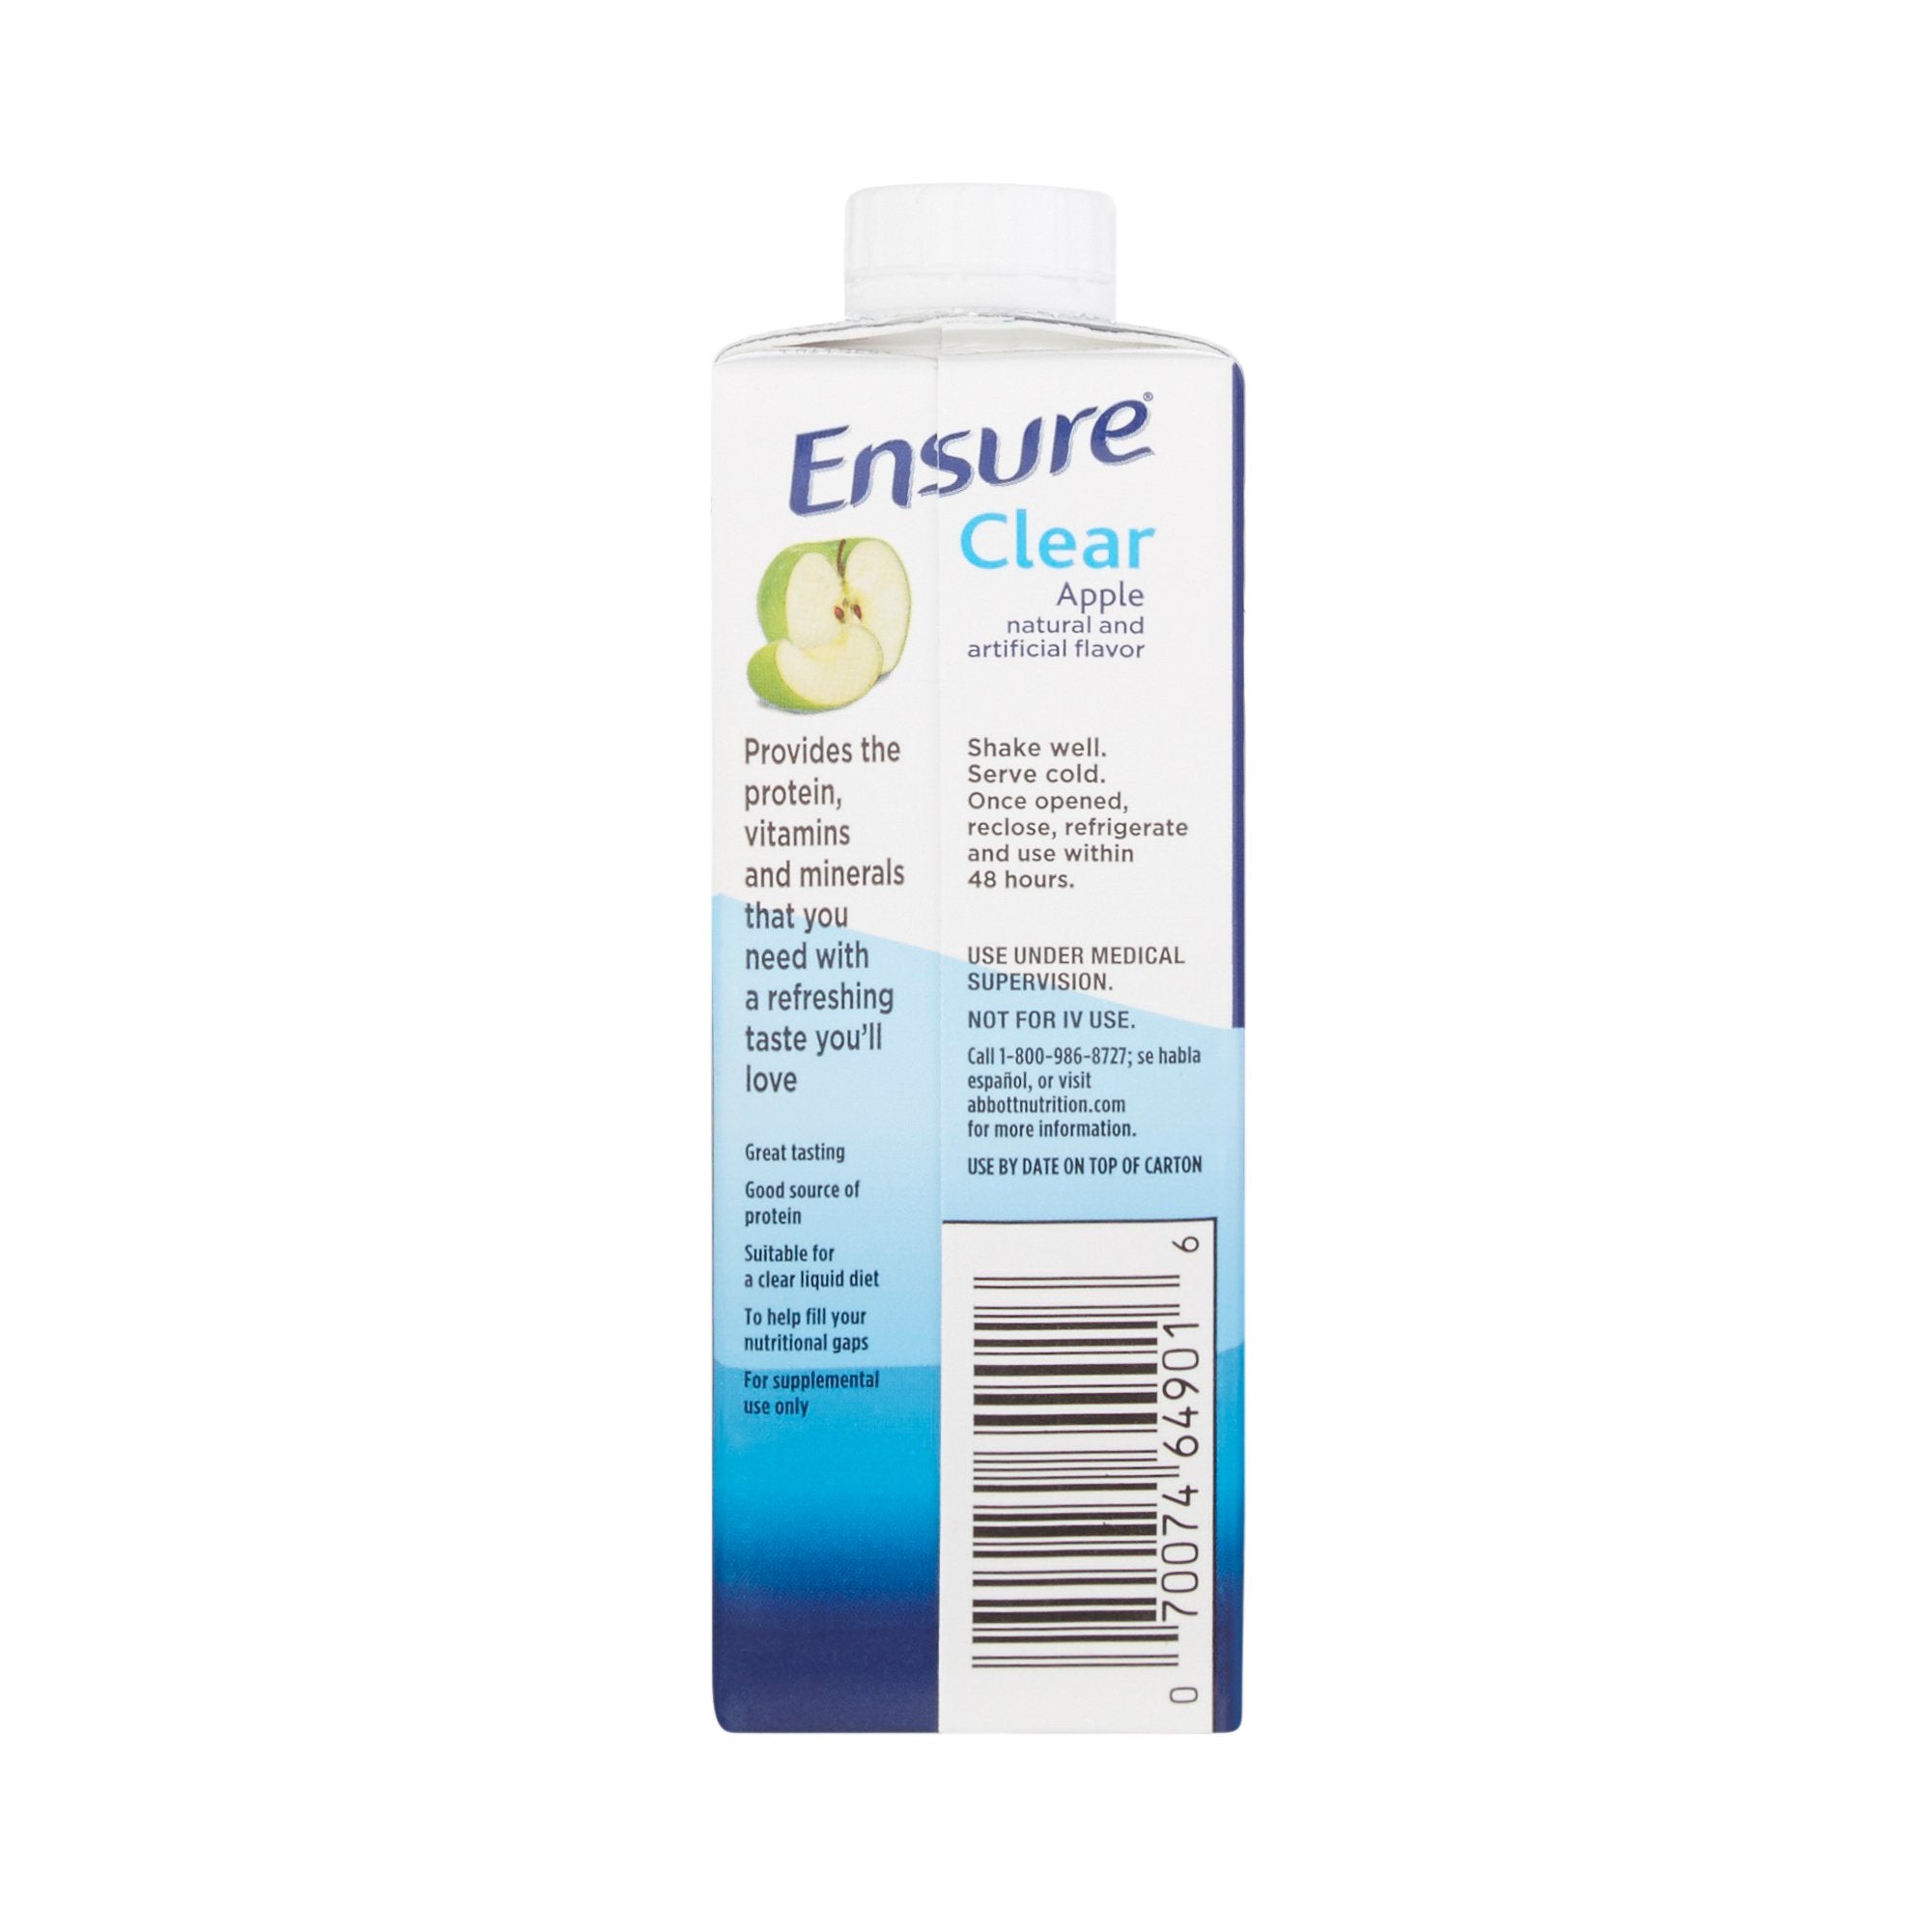 Ensure® Clear Therapeutic Nutrition, Apple, 8-ounce carton